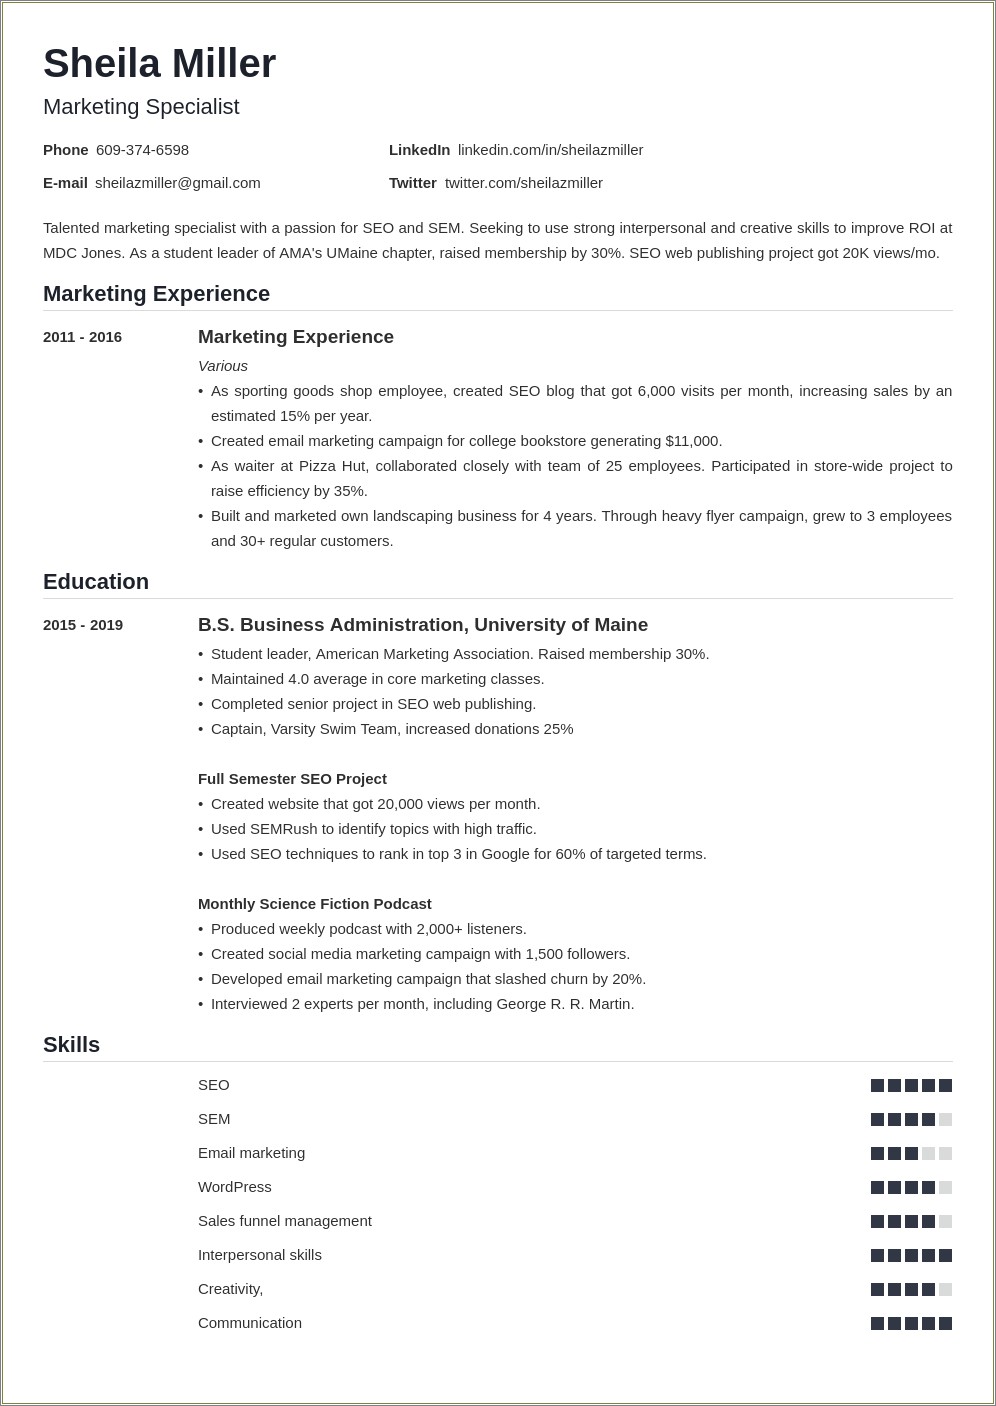 Examples Of Skills To Put On A Resume